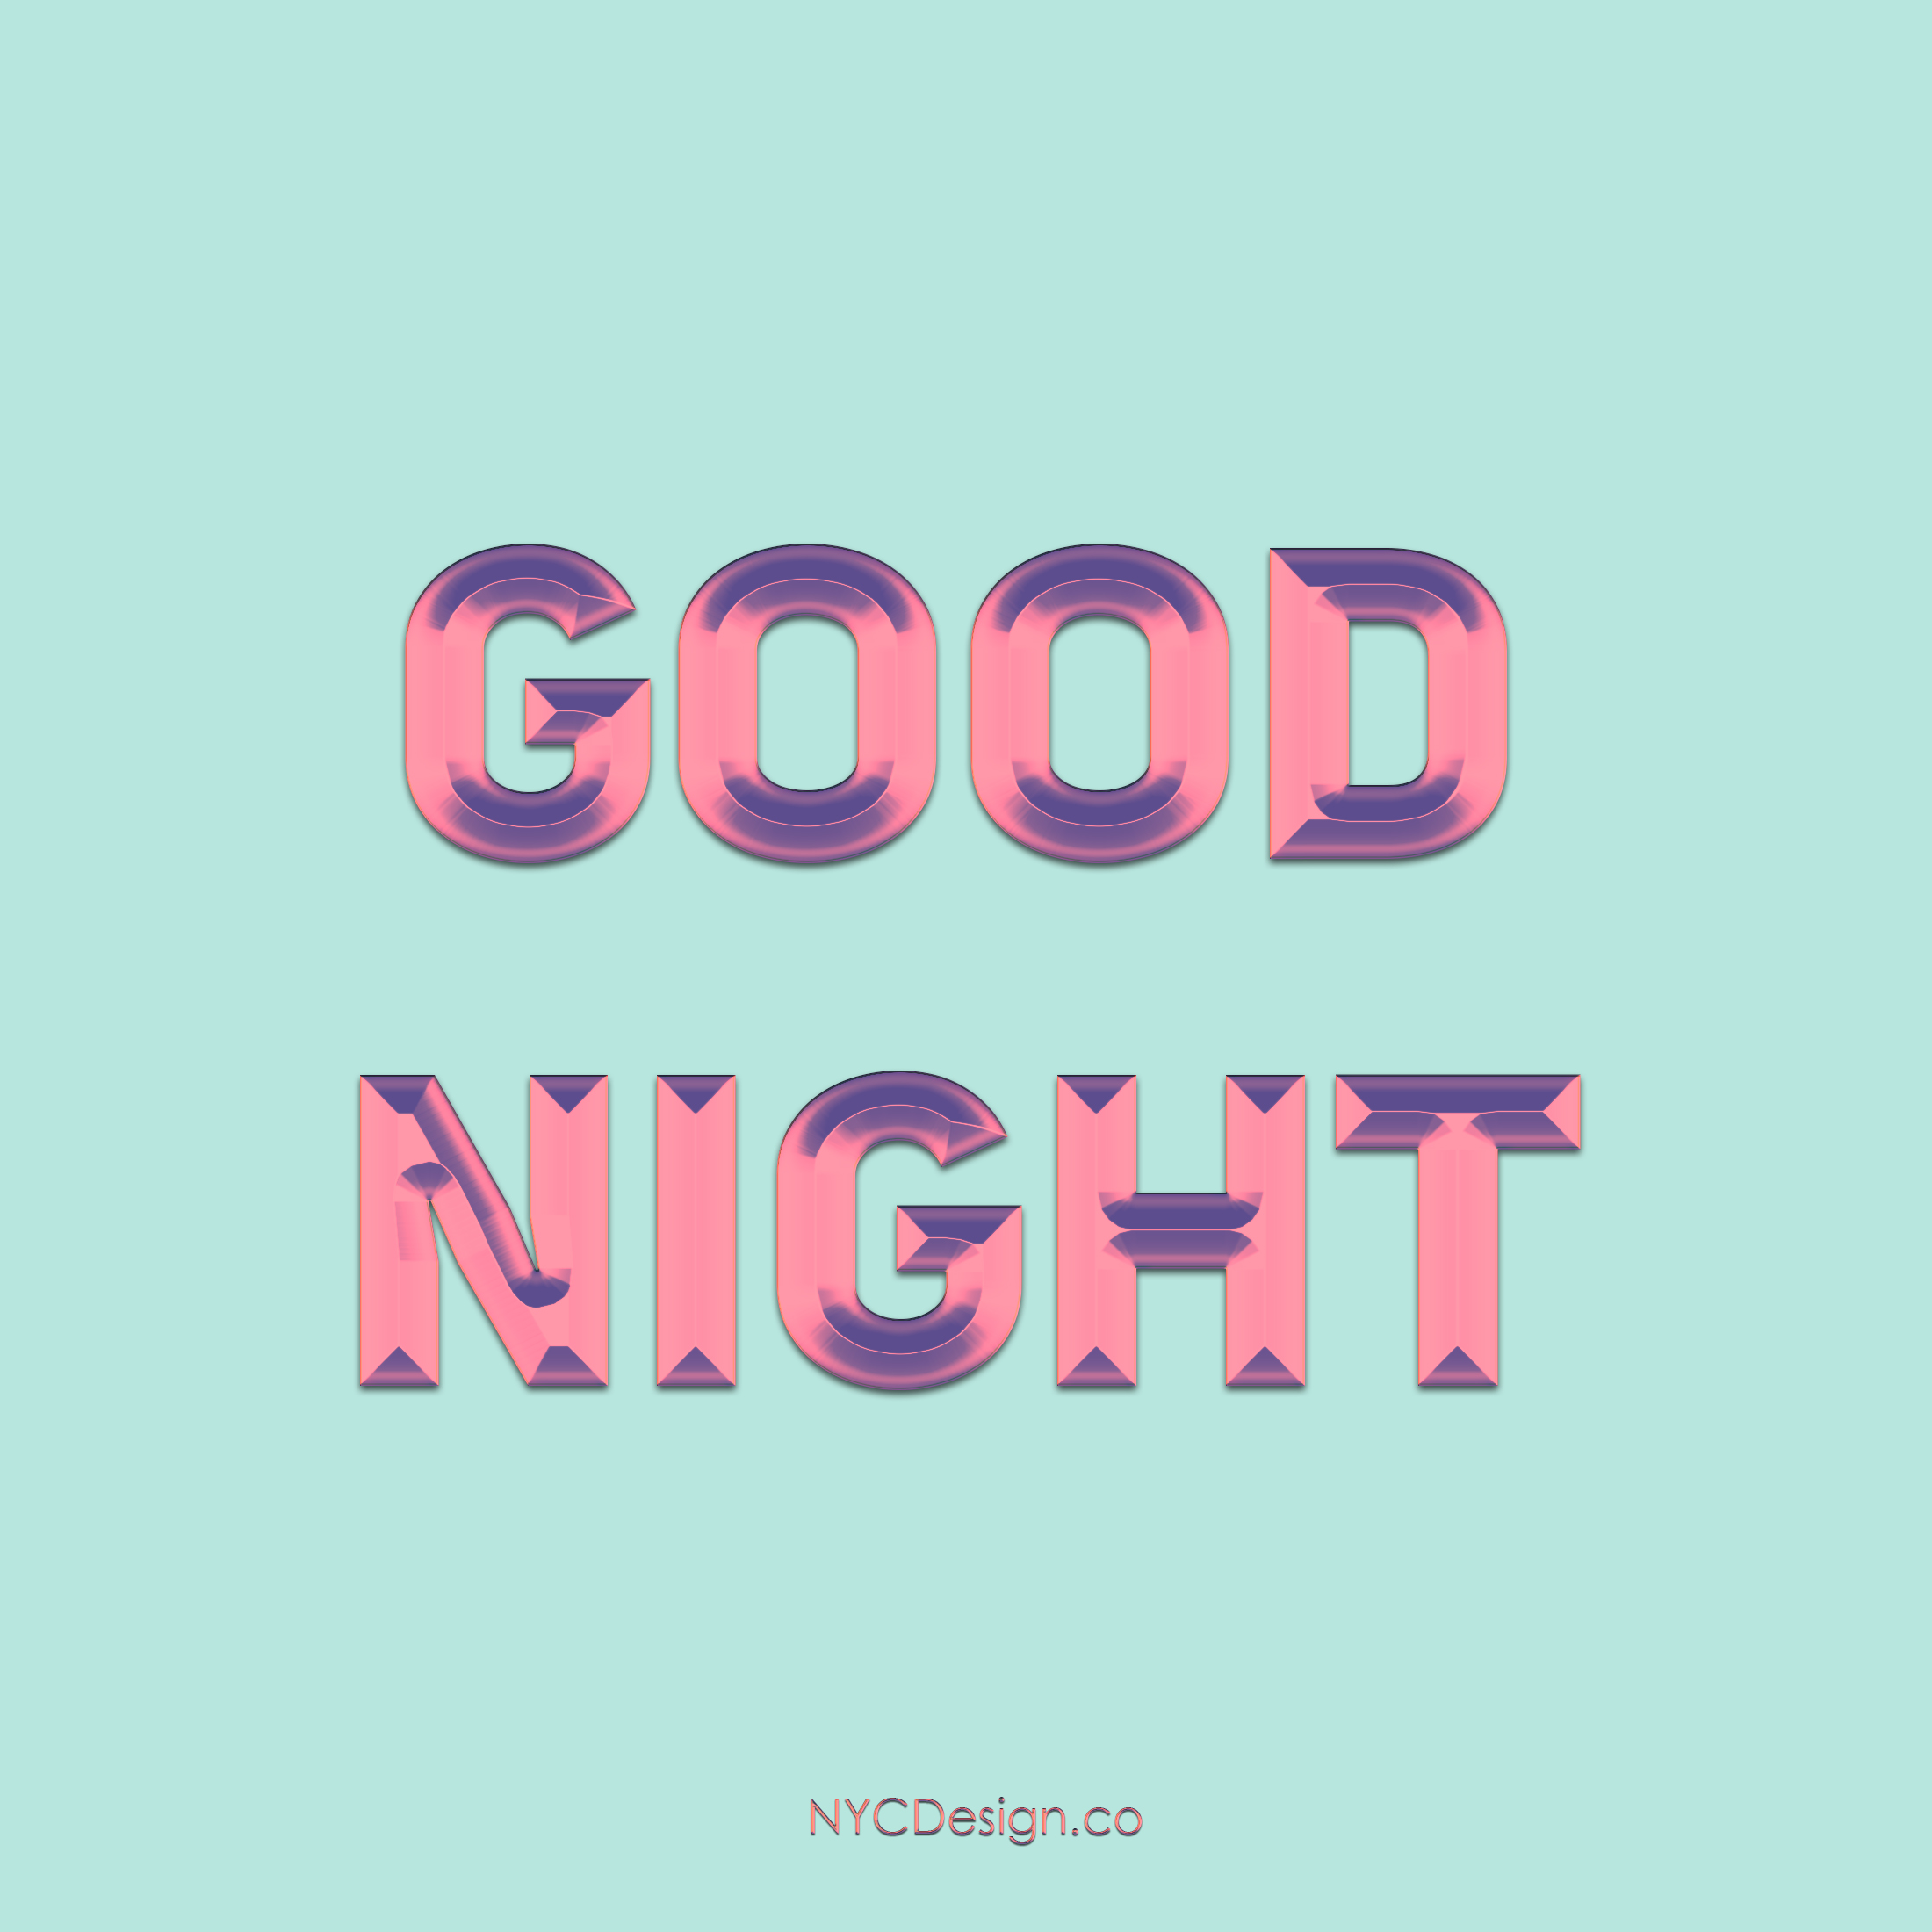 85 Good Night Quotes and Messages – NYCDesign.co: Printable Things